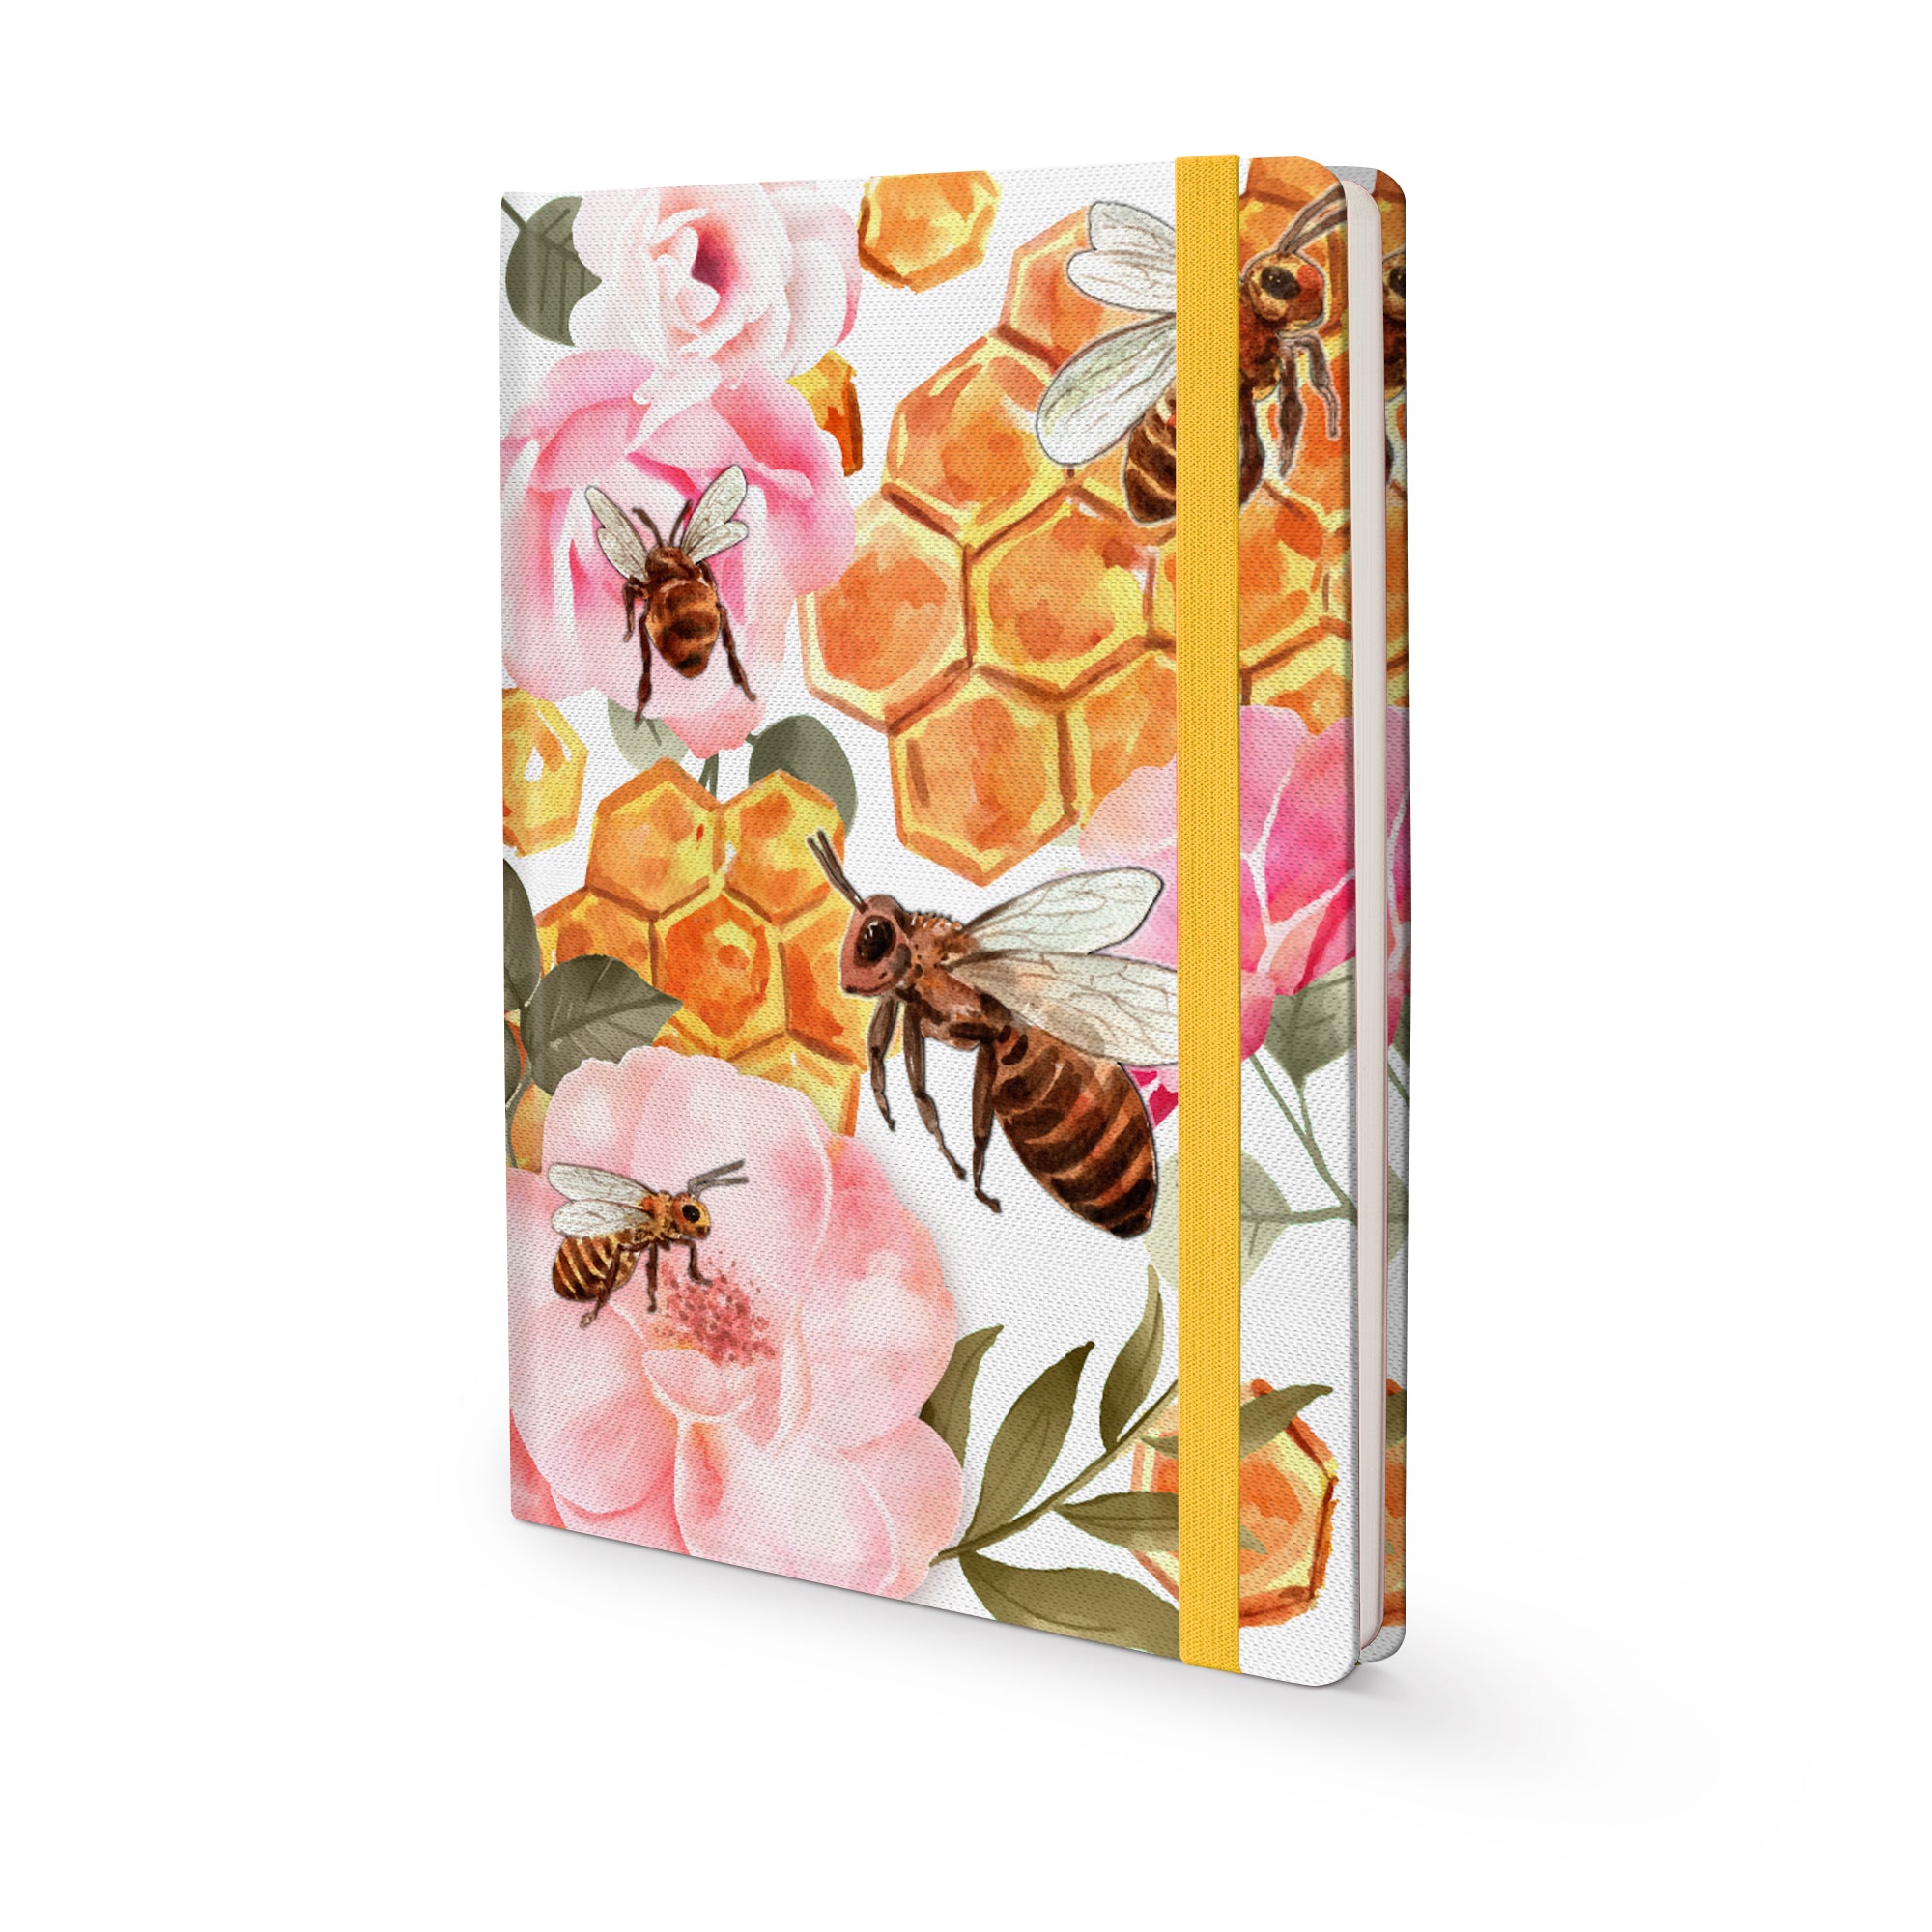 Image shows a Buzzing Bees Insect journal